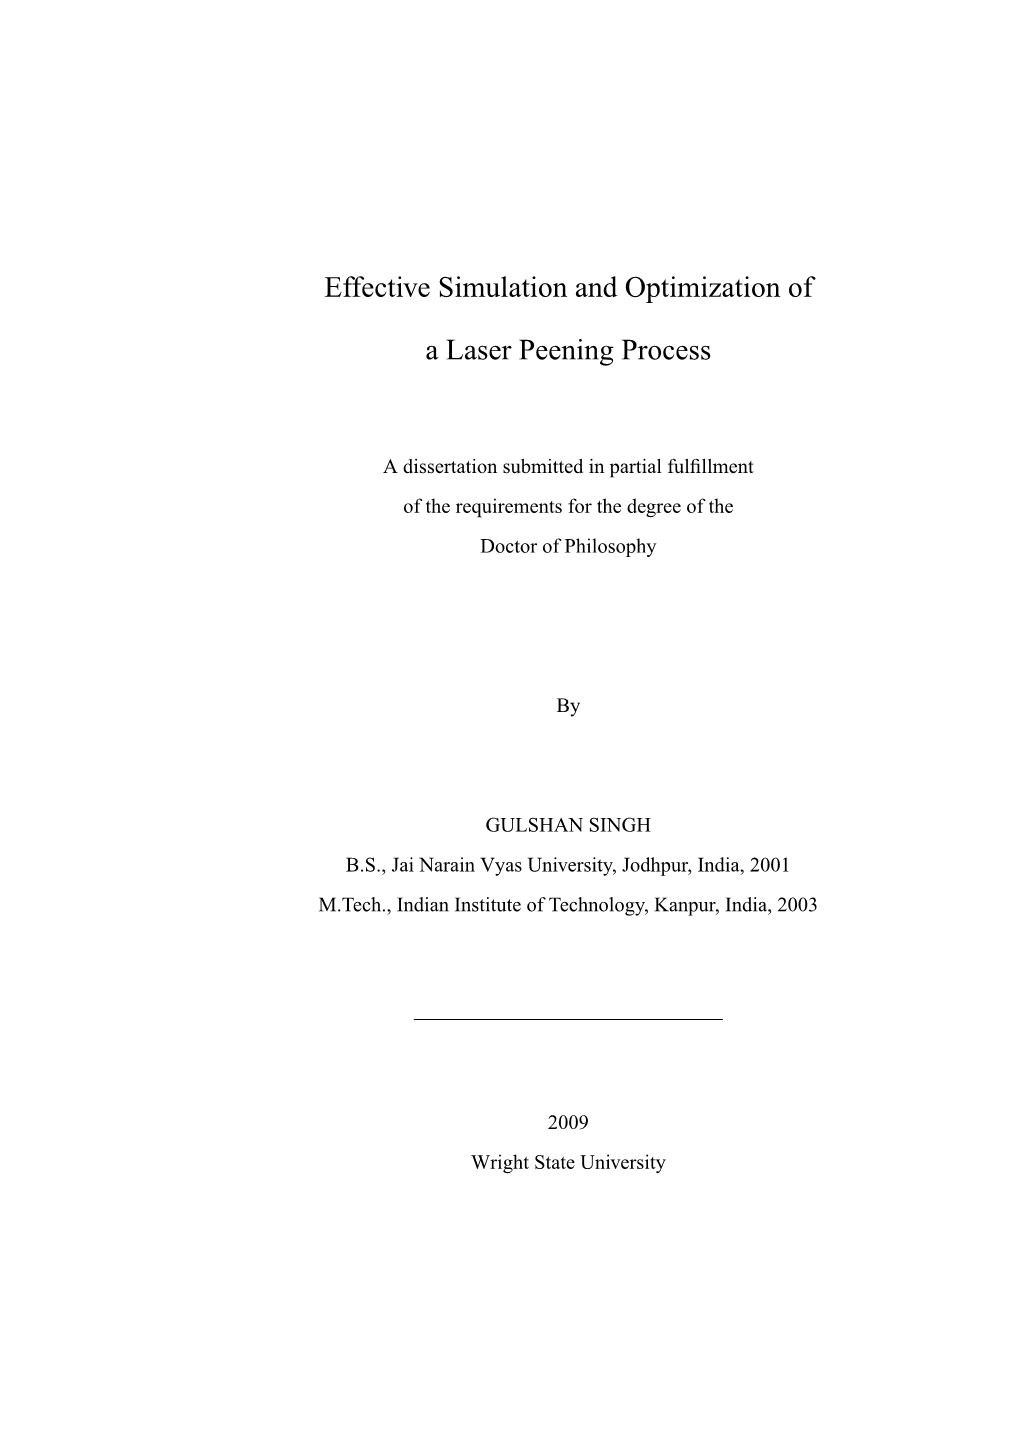 Effective Simulation and Optimization of a Laser Peening Process BE ACCEPTED in PARTIAL FULFILLMENT of the REQUIREMENTS for the DEGREE of Doctor of Philosophy